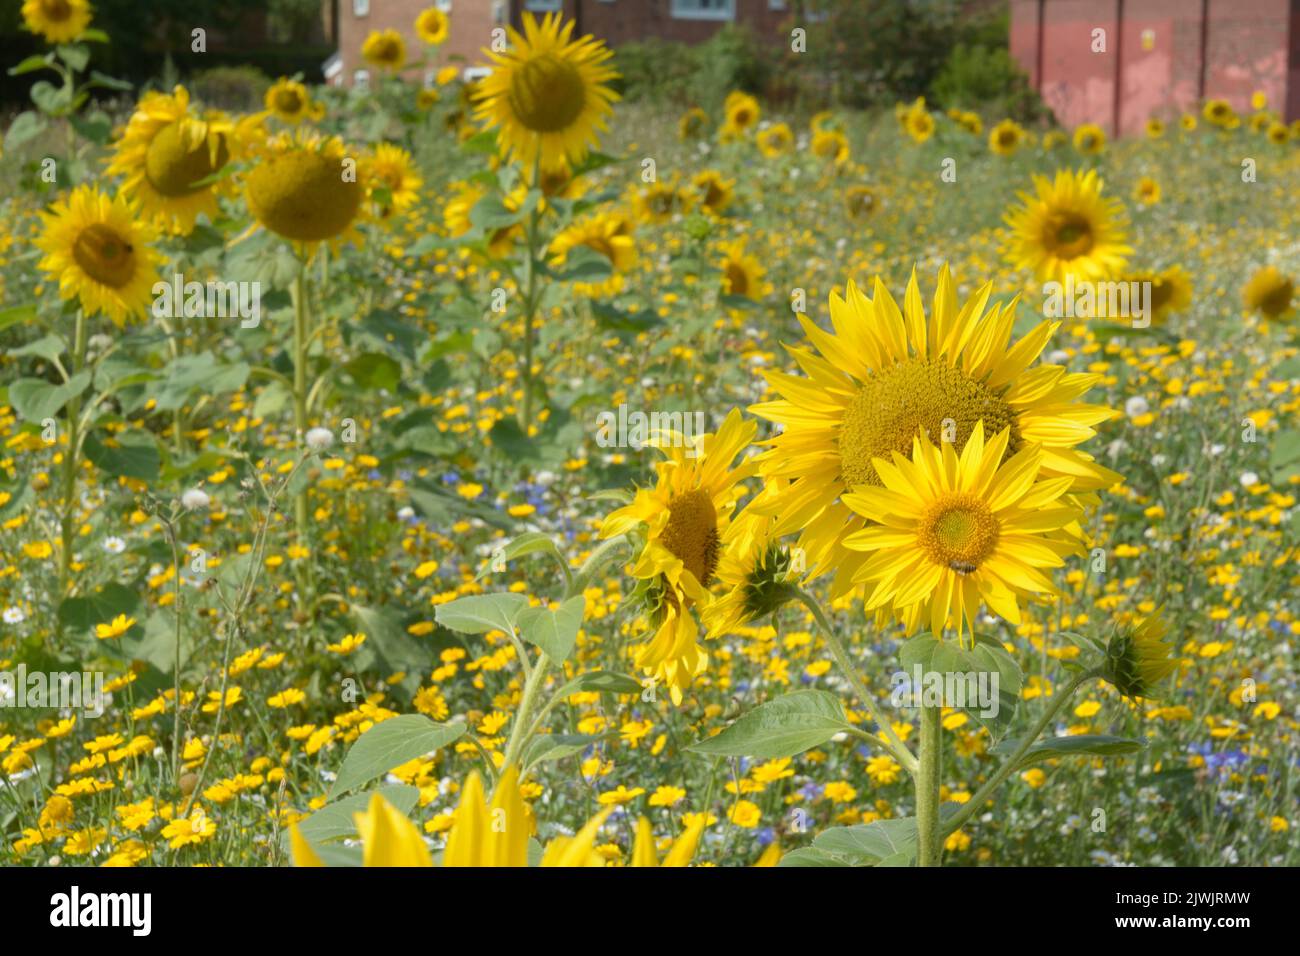 Wild seed sowing. Flowers in bloom in a public space in Wythenshawe, Manchester. Stock Photo